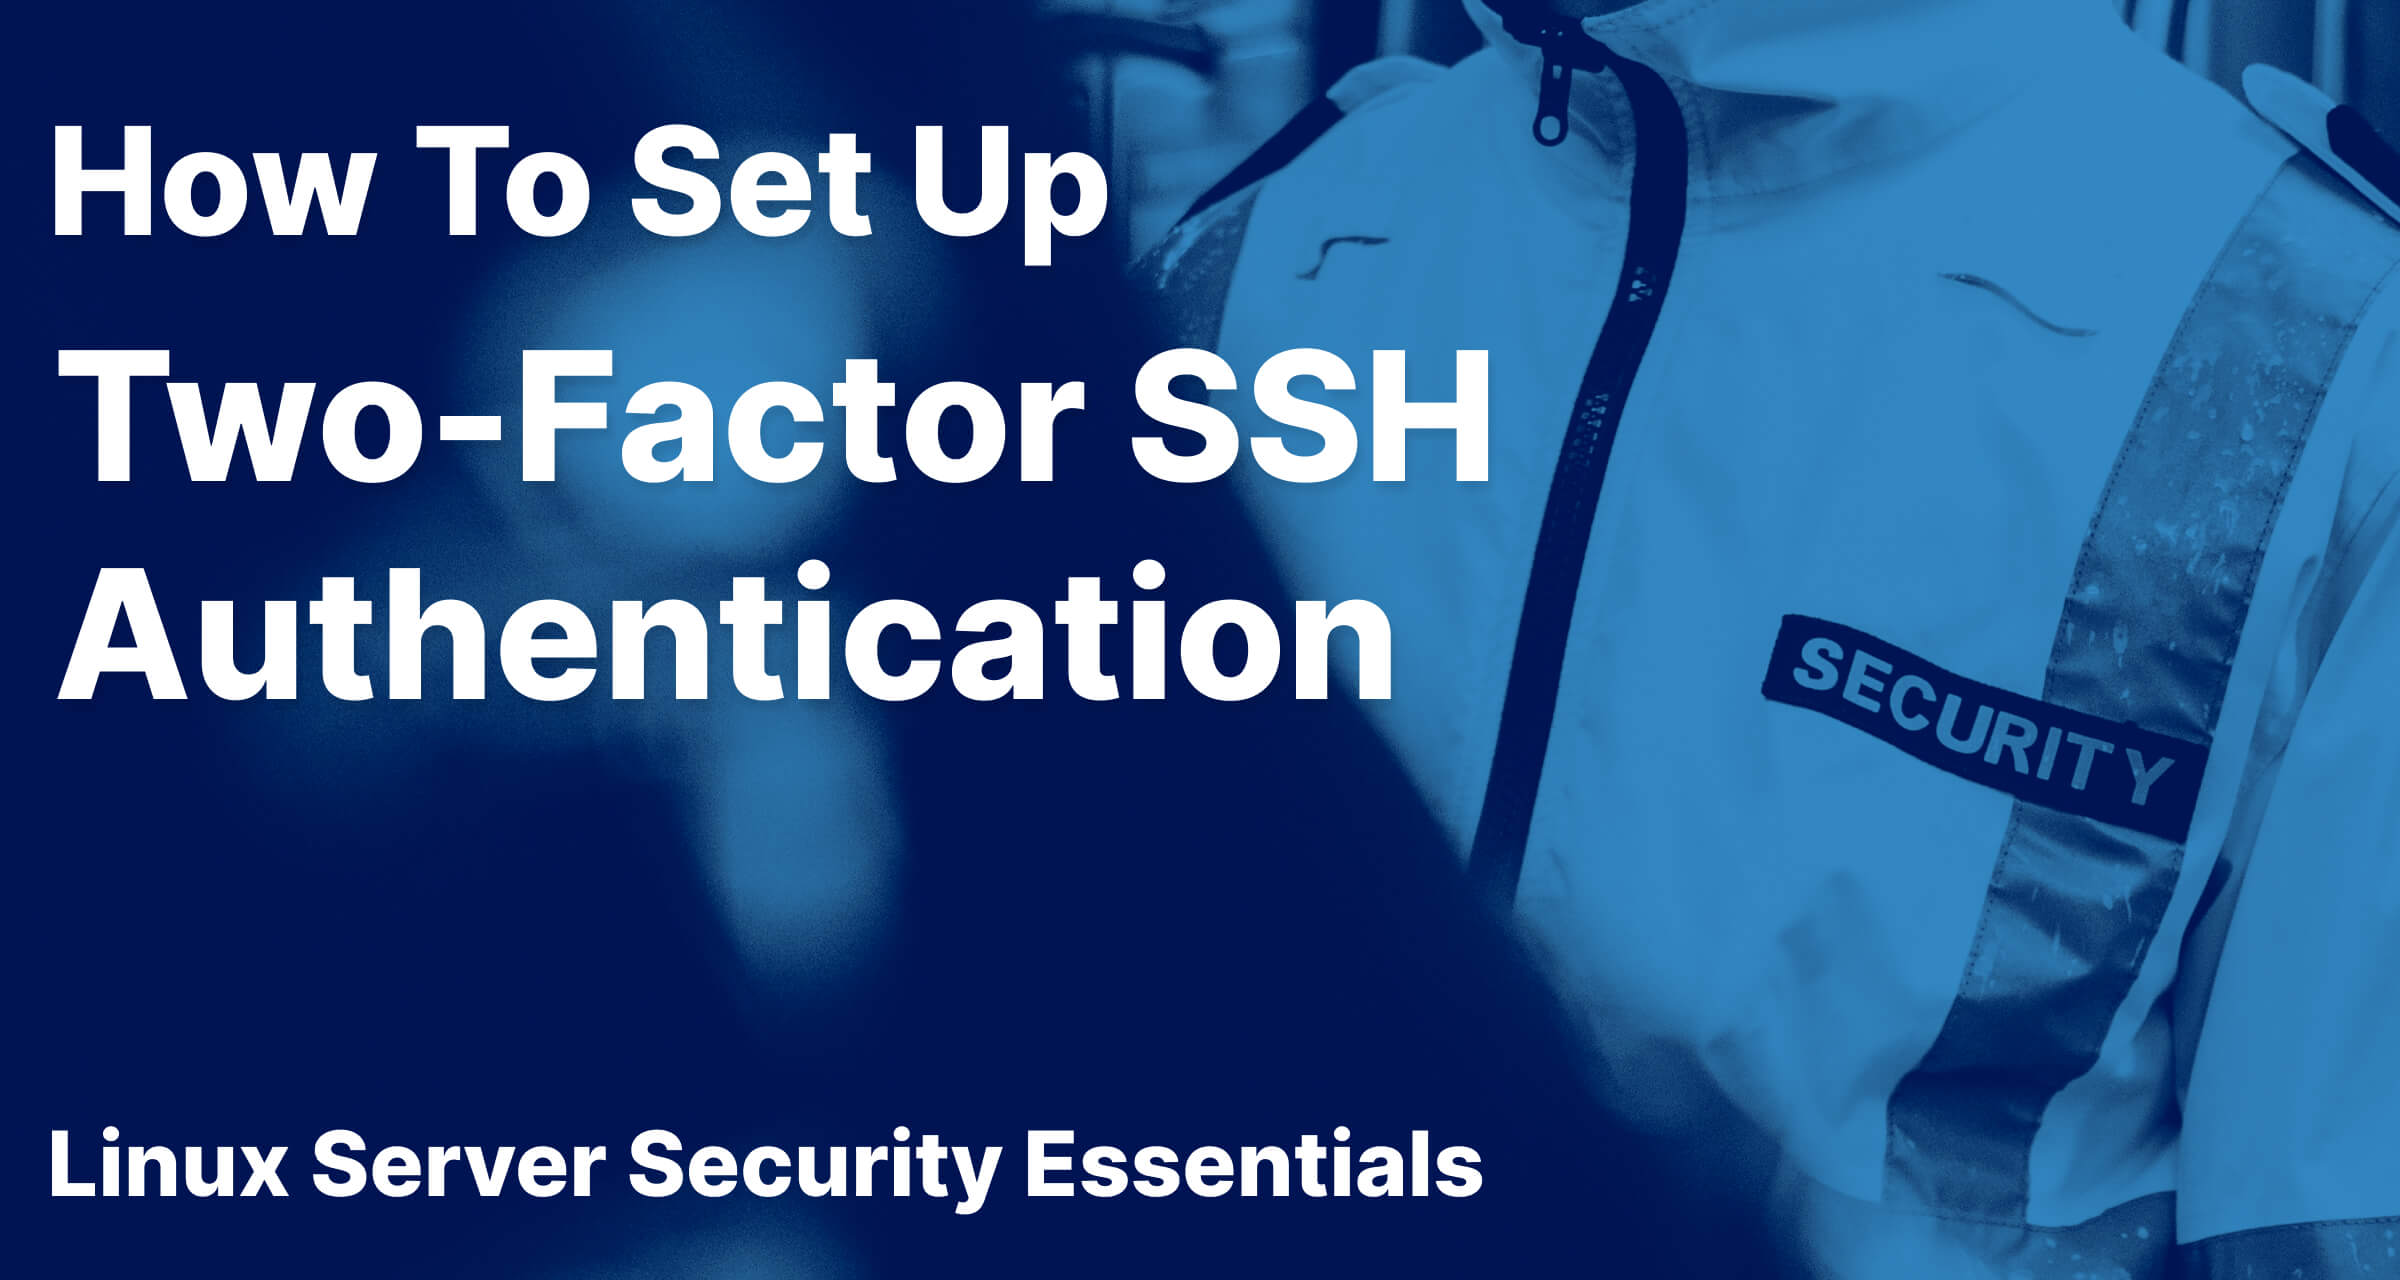 How to set up Two-Factor SSH Authentication on Linux